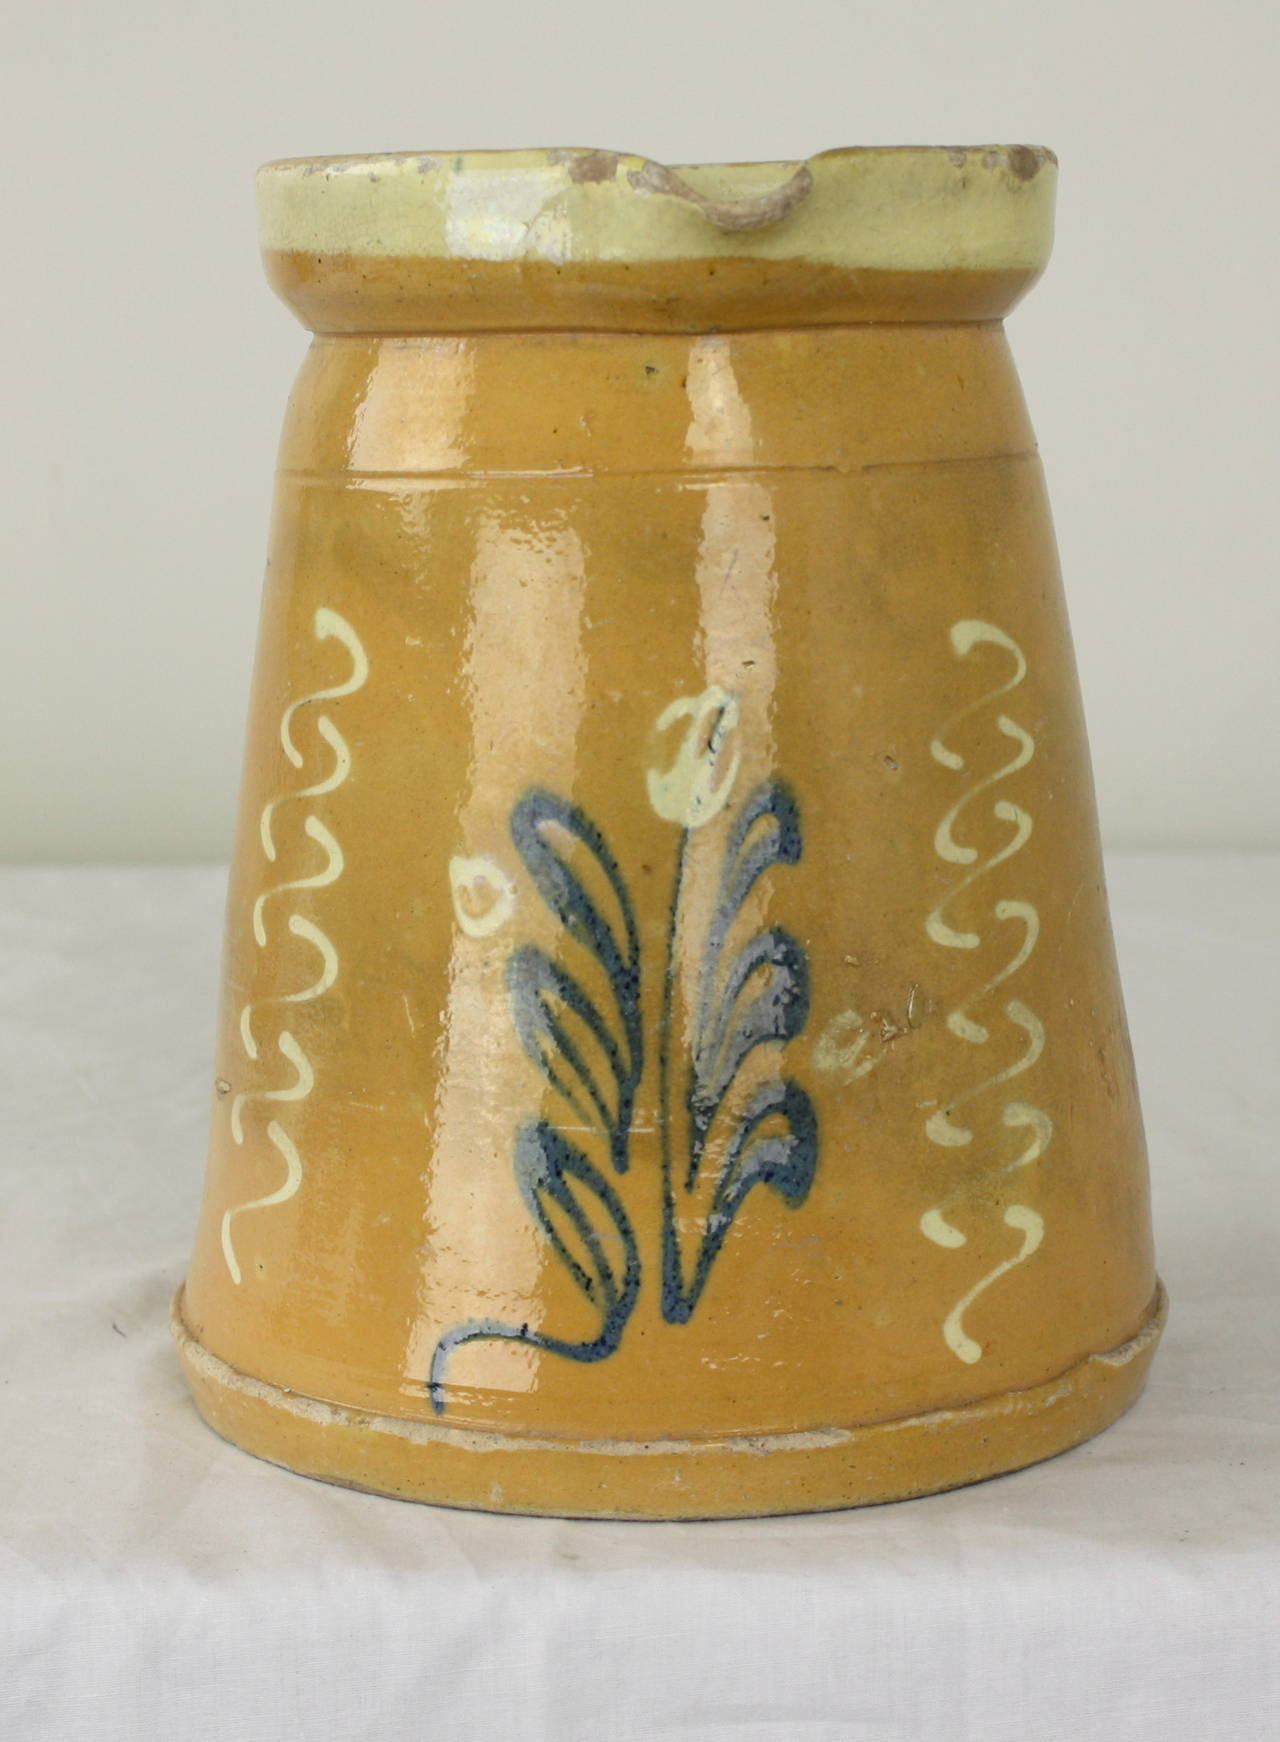 This charming Alsace region pottery jug has a lovely color and colorful flower decoration.  This jug is a large size and is suitable as a decoration or a classic jug or vase.